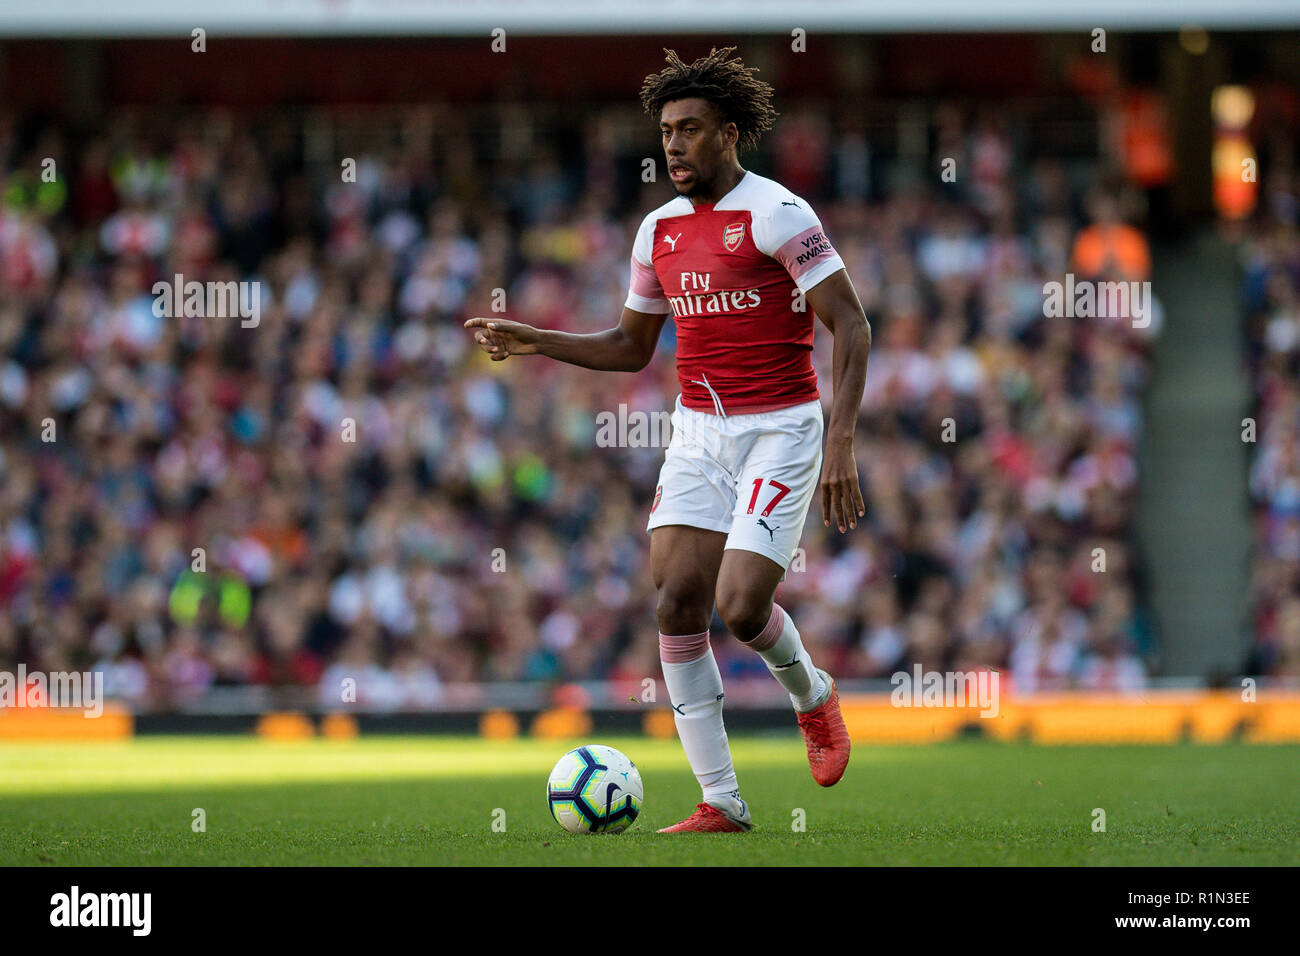 LONDON, ENGLAND - SEPTEMBER 29: Alex Iwobi of Arsenal during the Premier League match between Arsenal FC and Watford FC at Emirates Stadium on September 29, 2018 in London, United Kingdom. (MB Media) Stock Photo